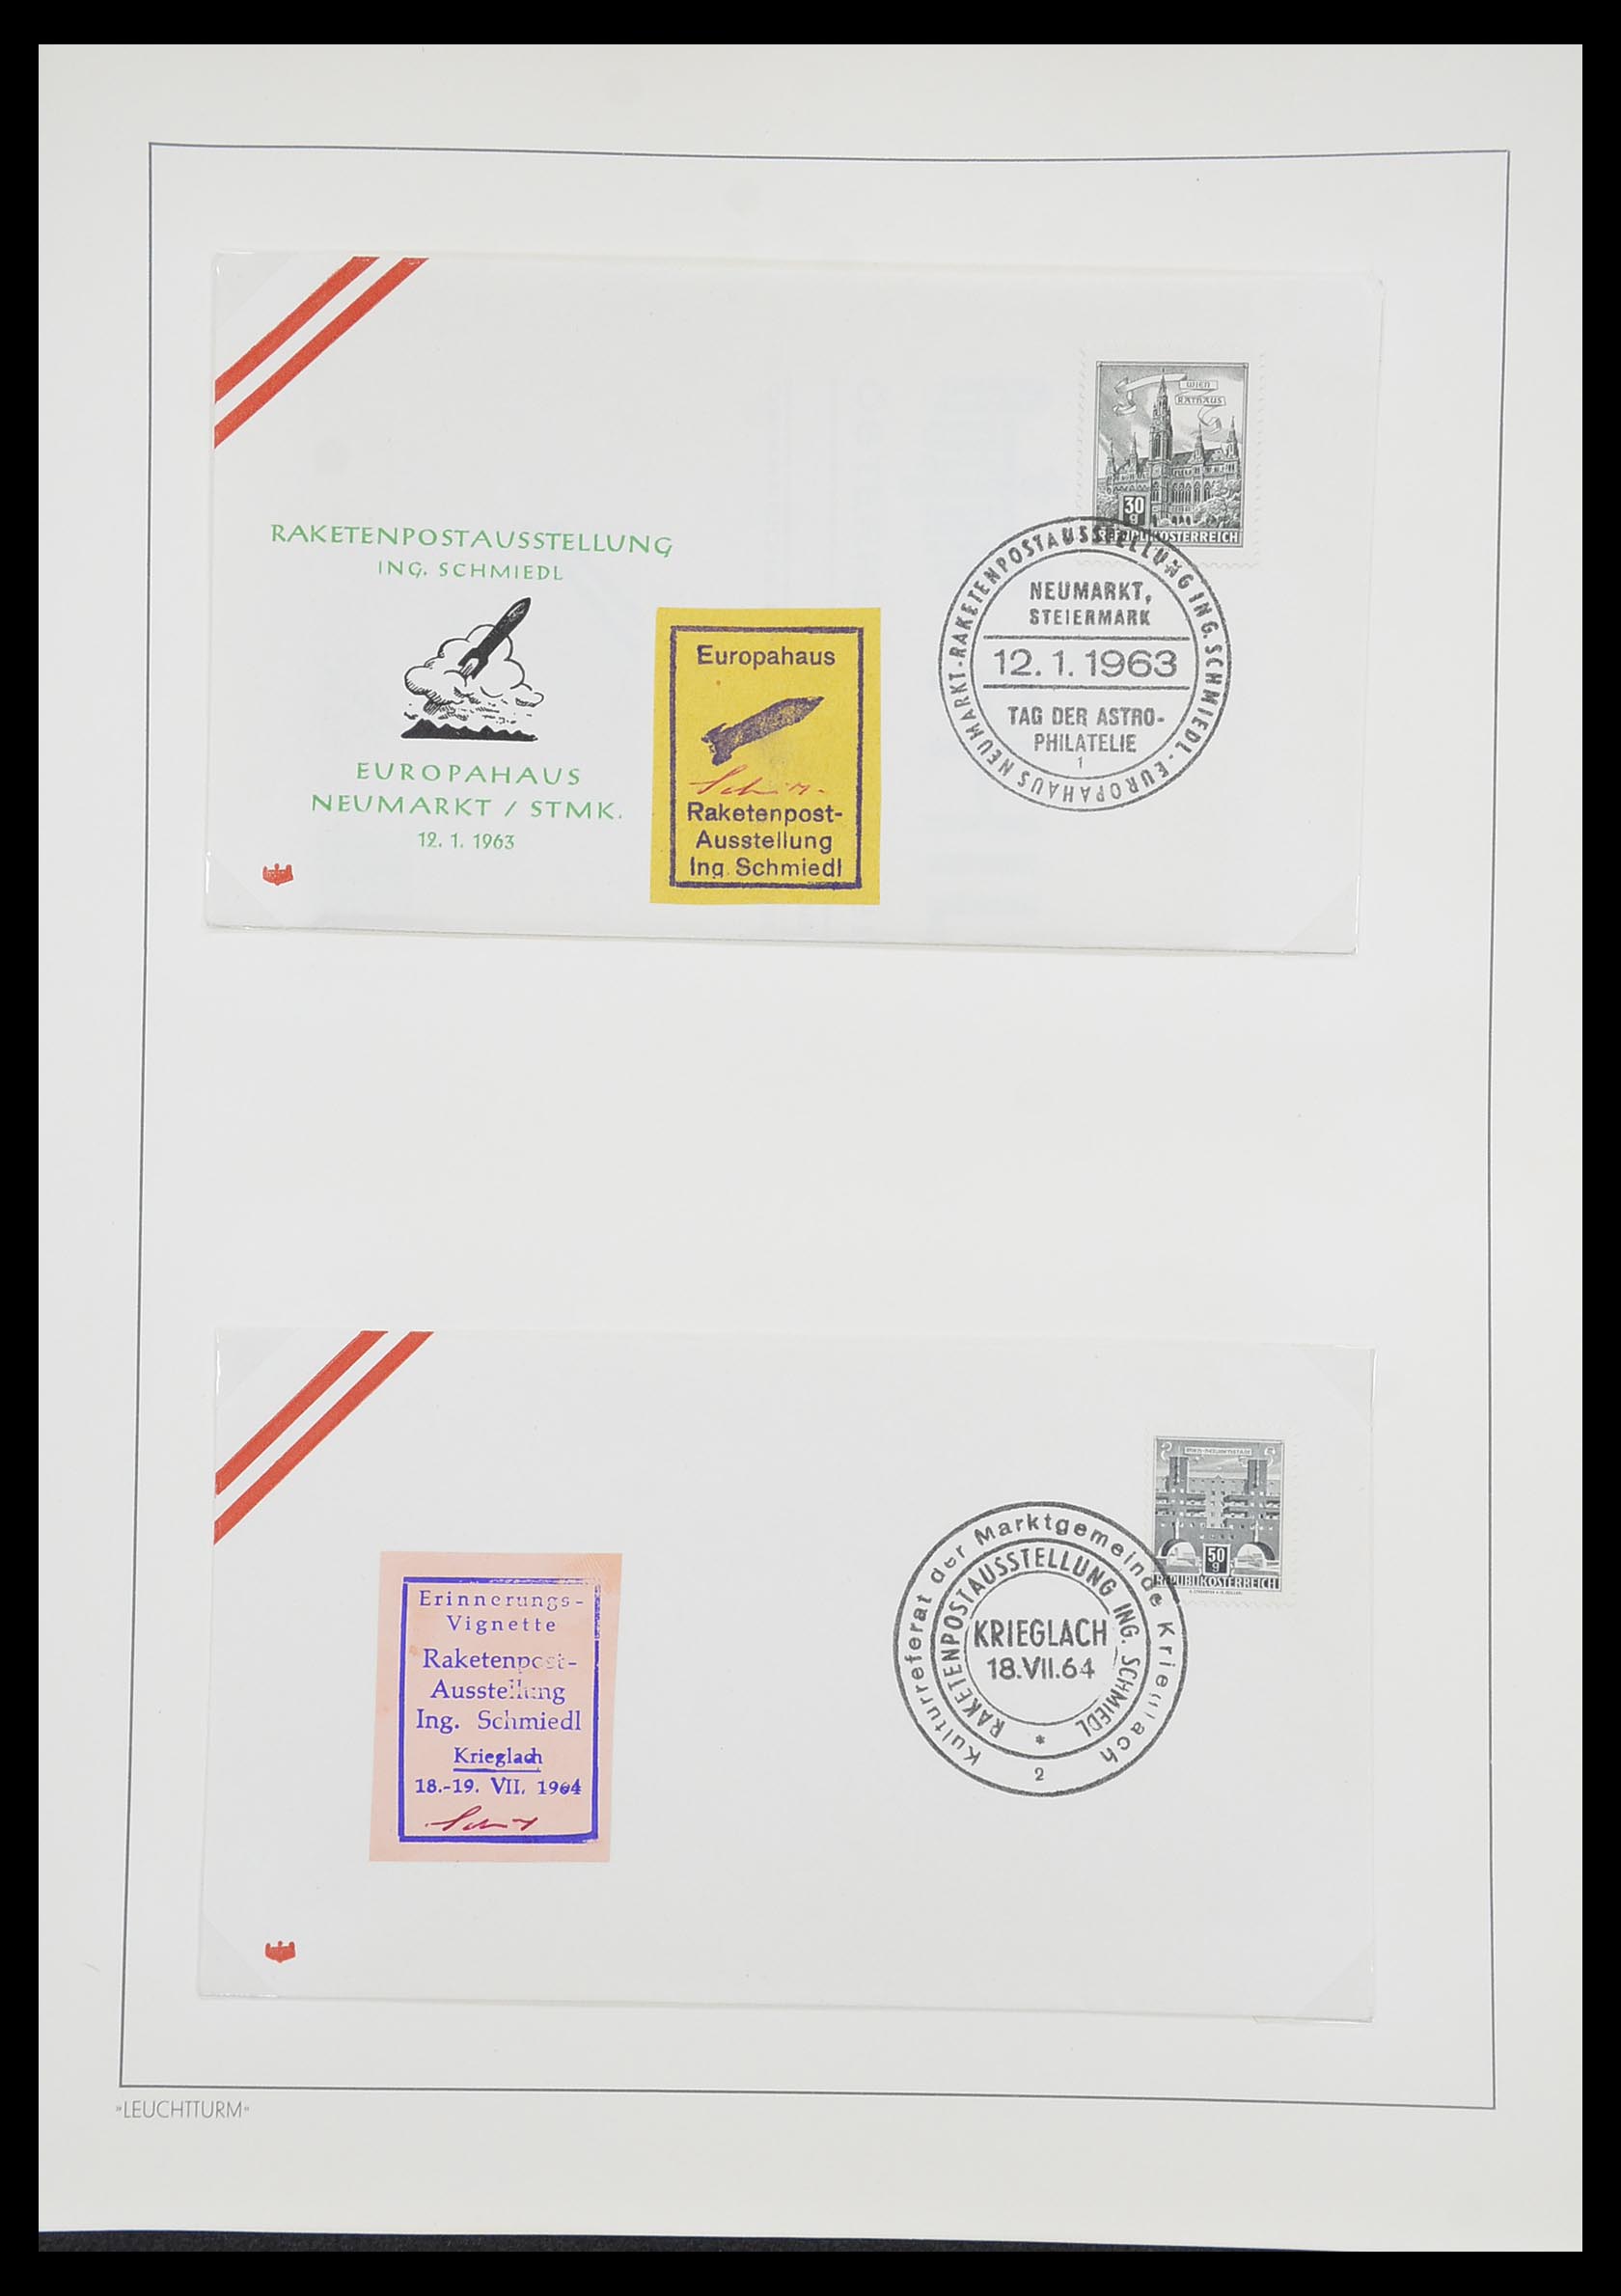 33463 116 - Stamp collection 33463 Rocket mail covers.